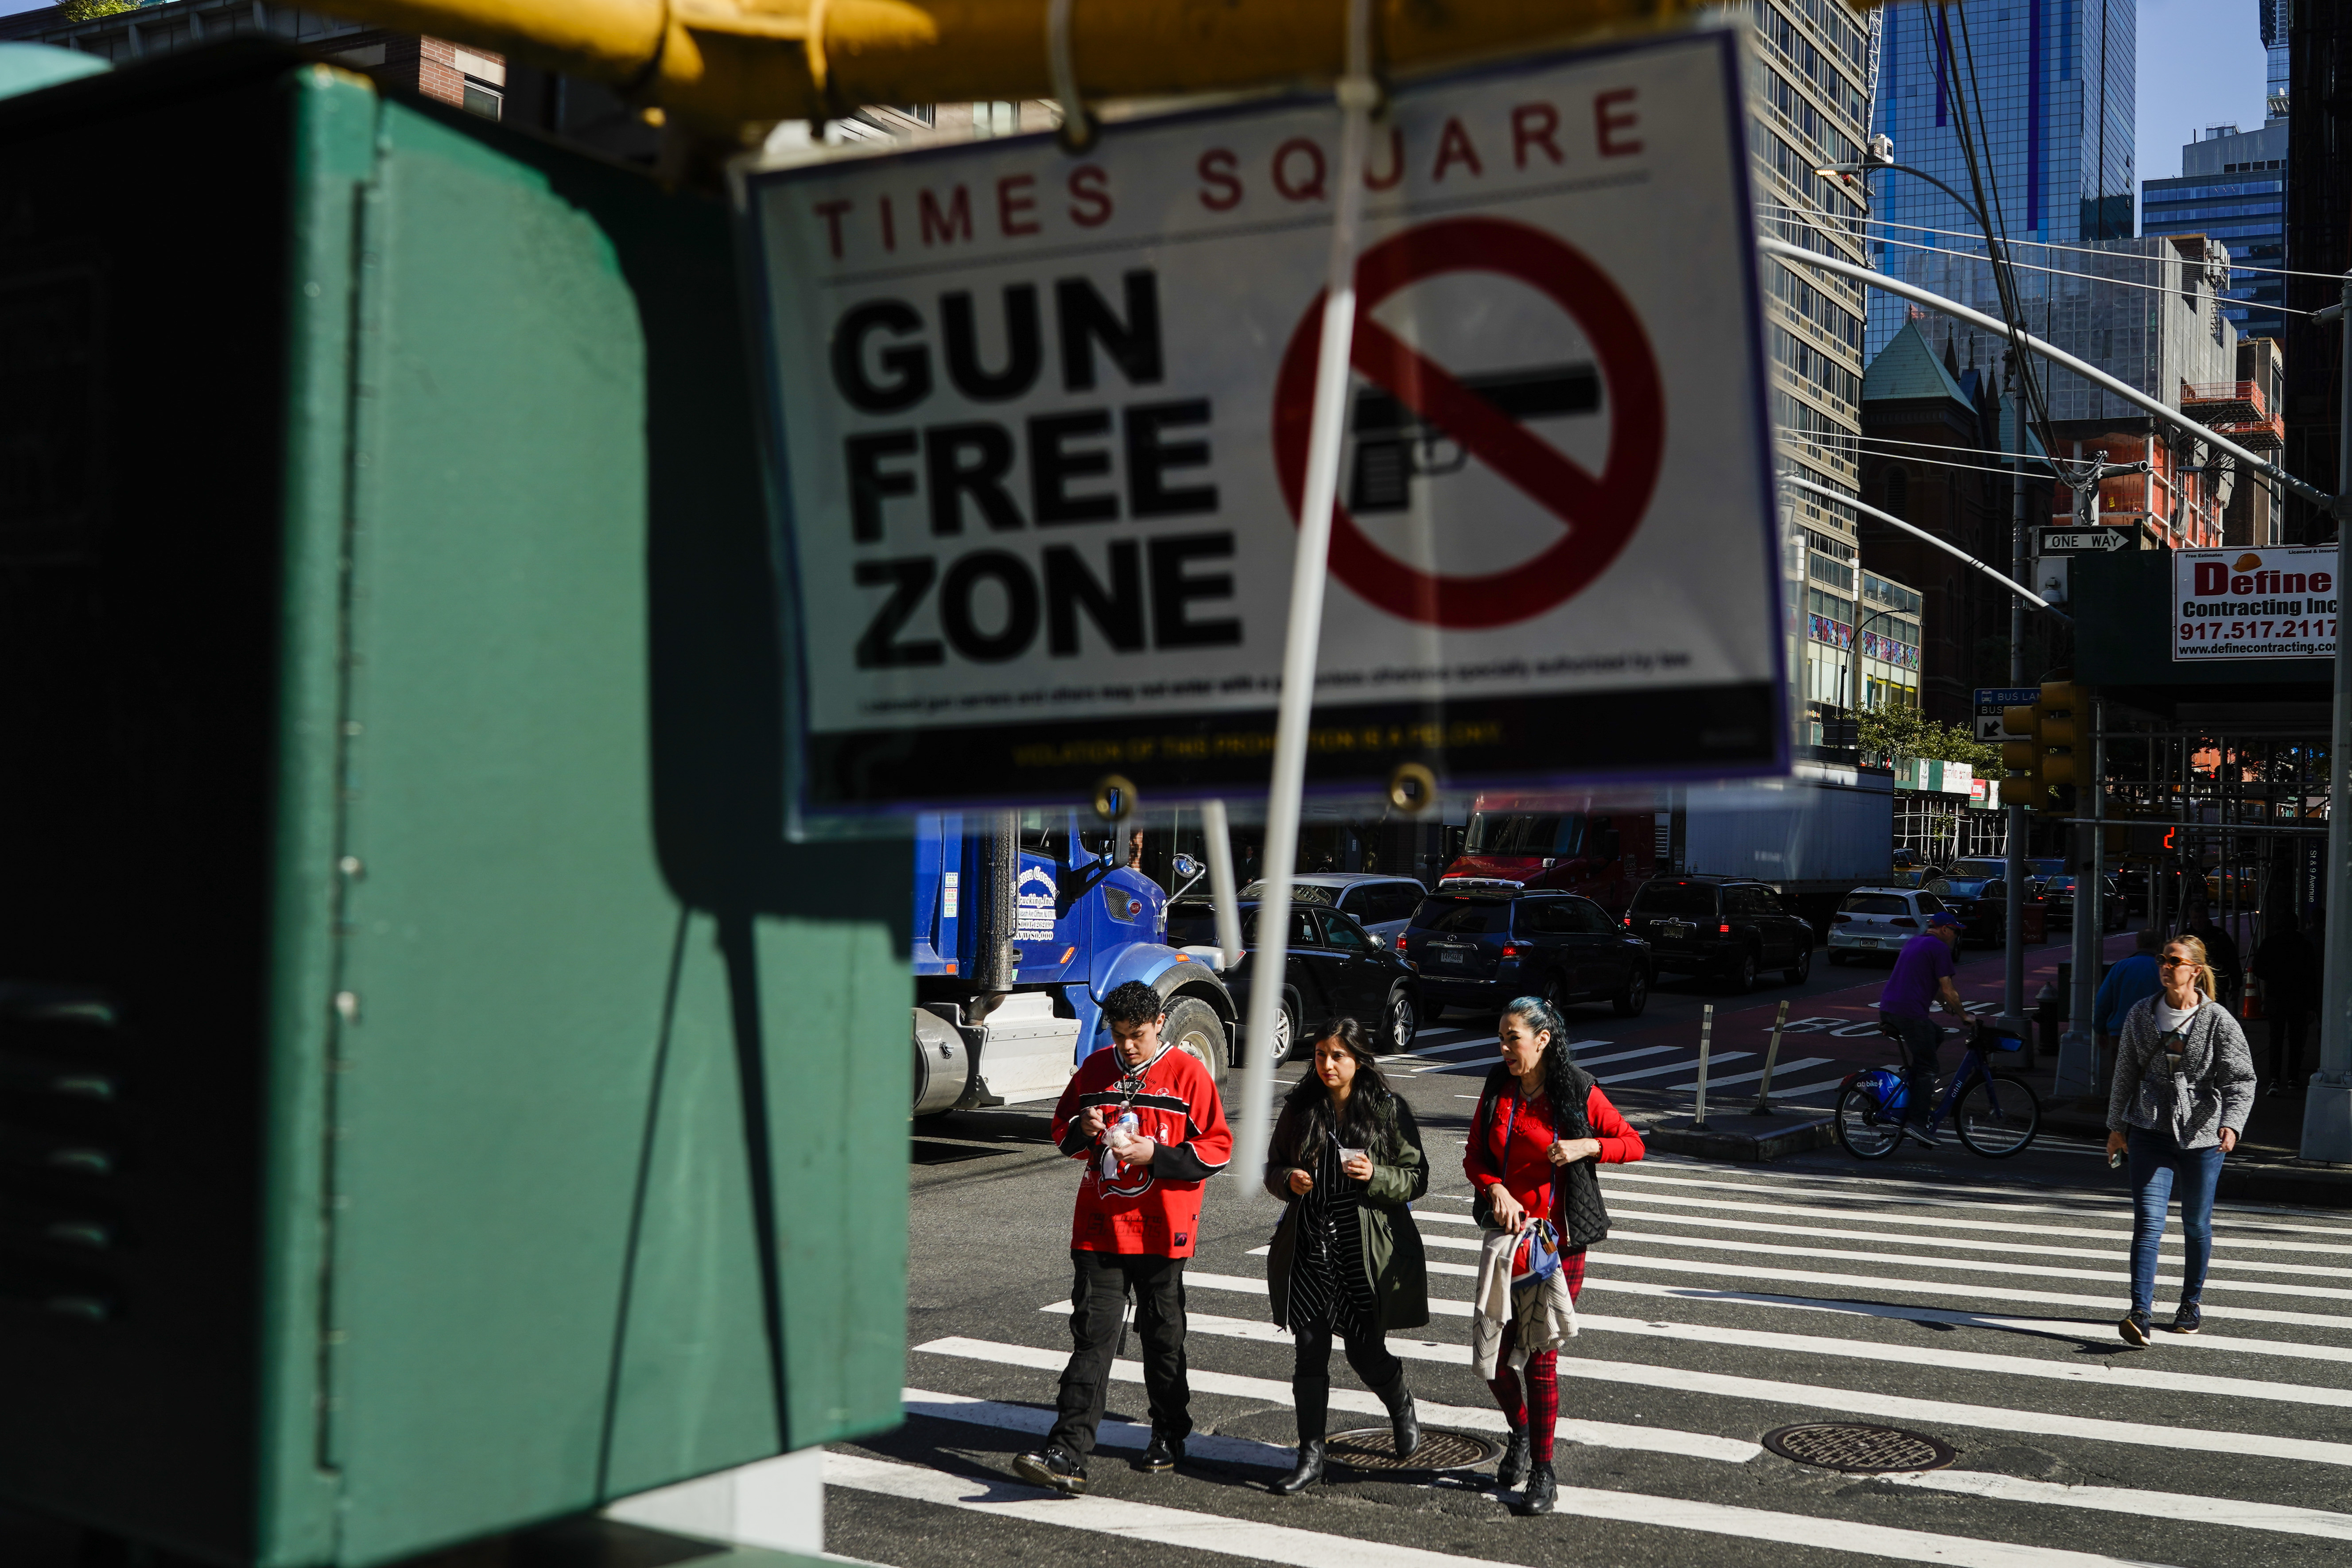 People walk near a Gun Free Zone sign displayed near Times Square on October 11, 2022 in New York City.